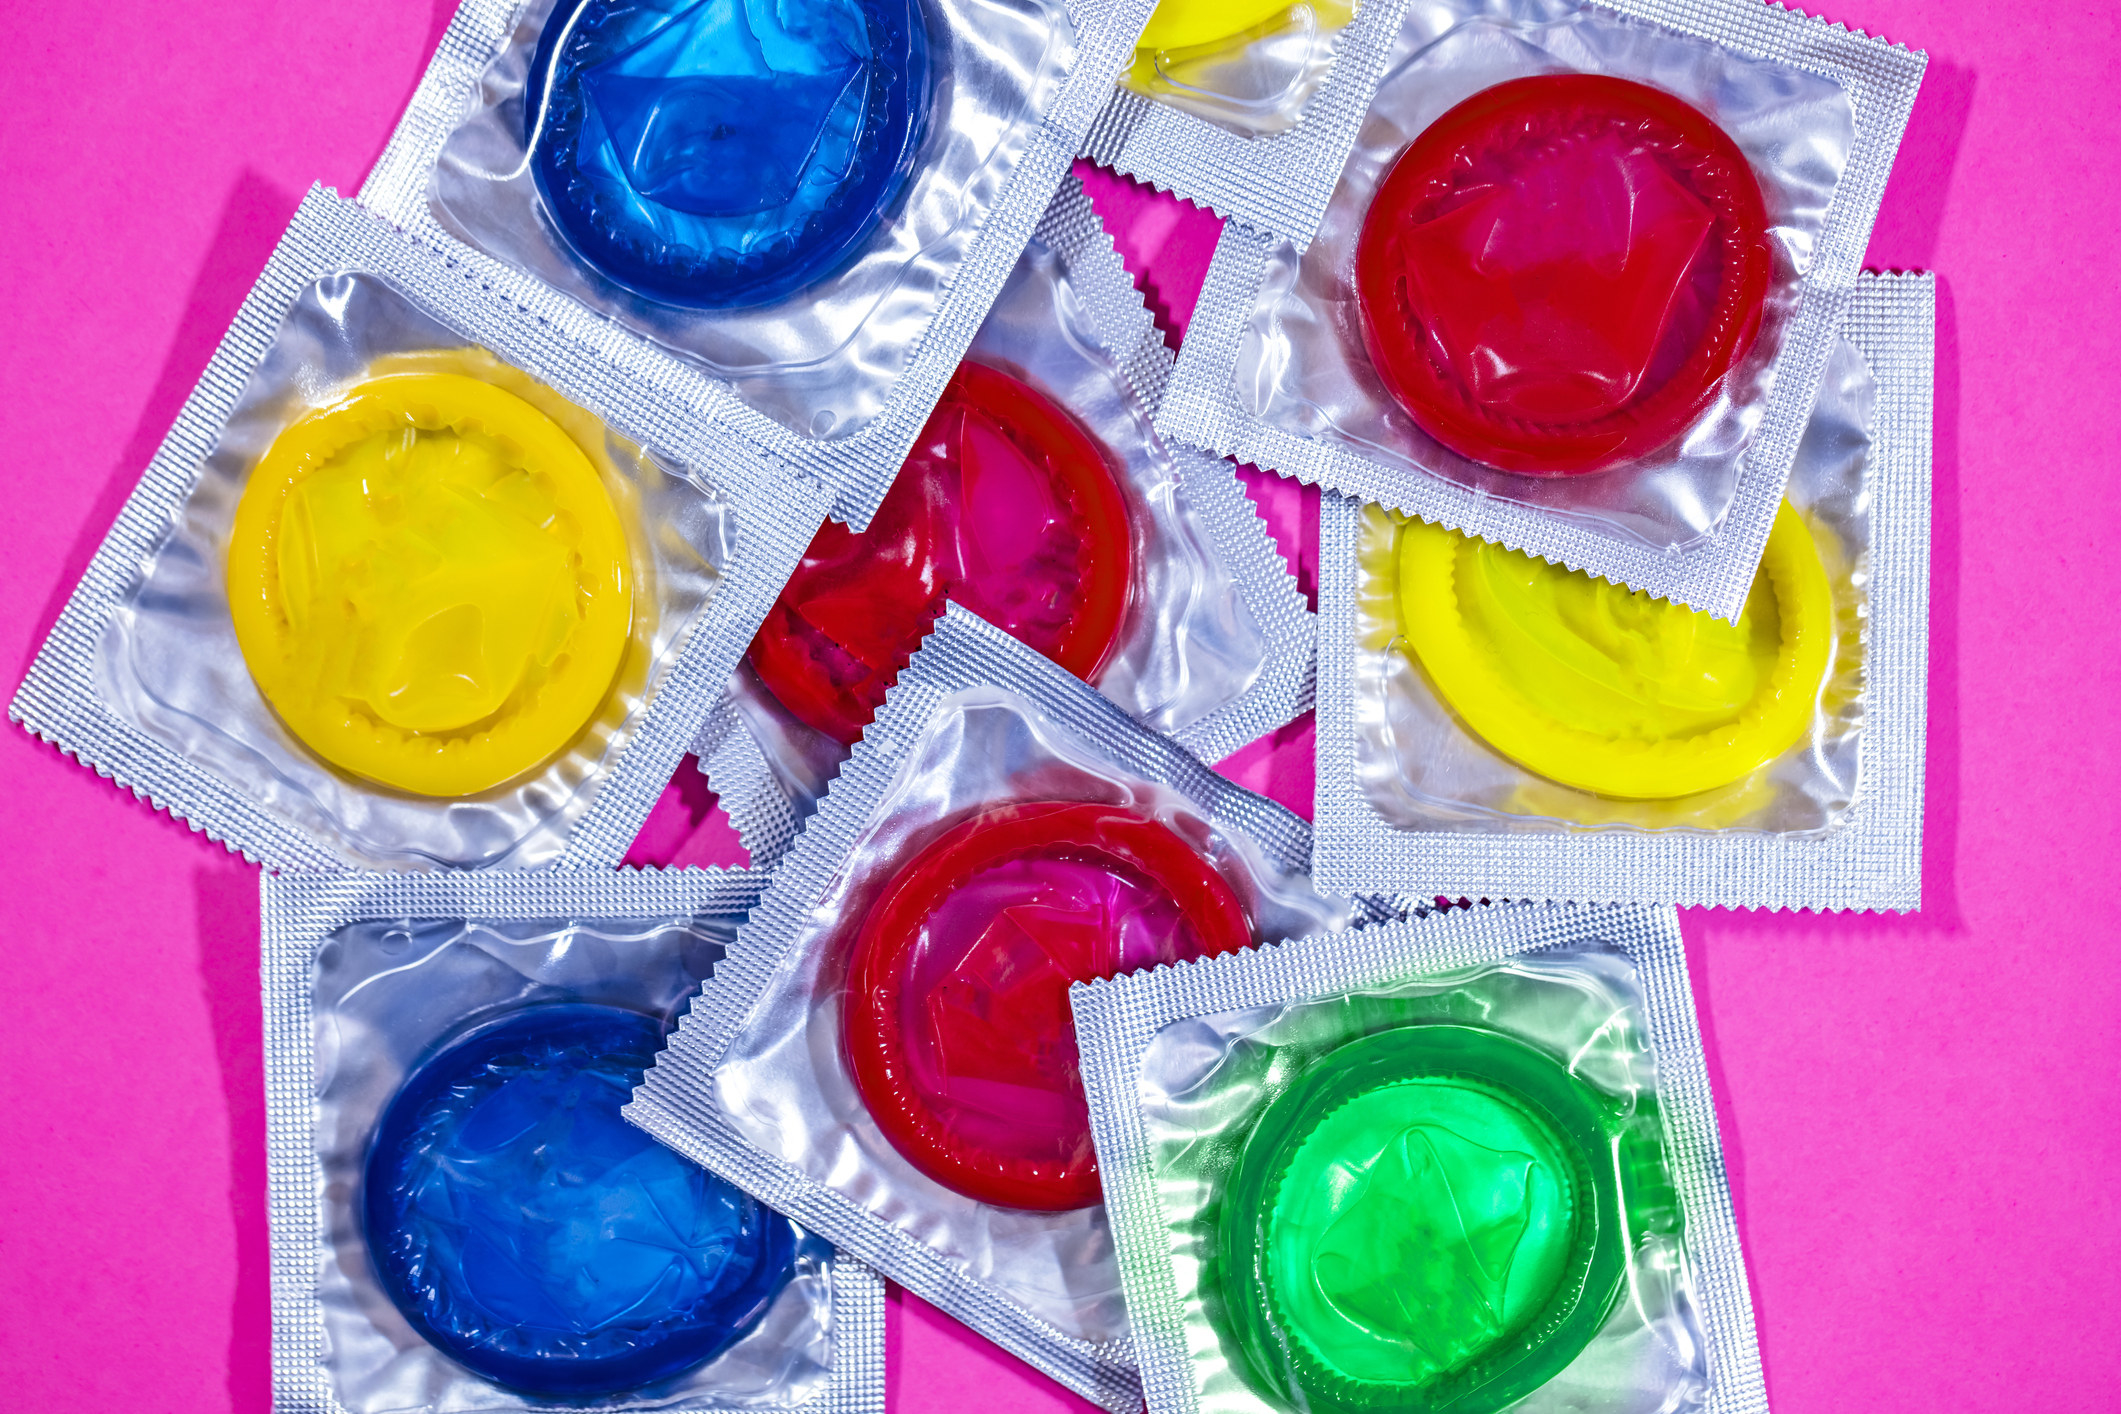 An assortment of different-colored condoms.